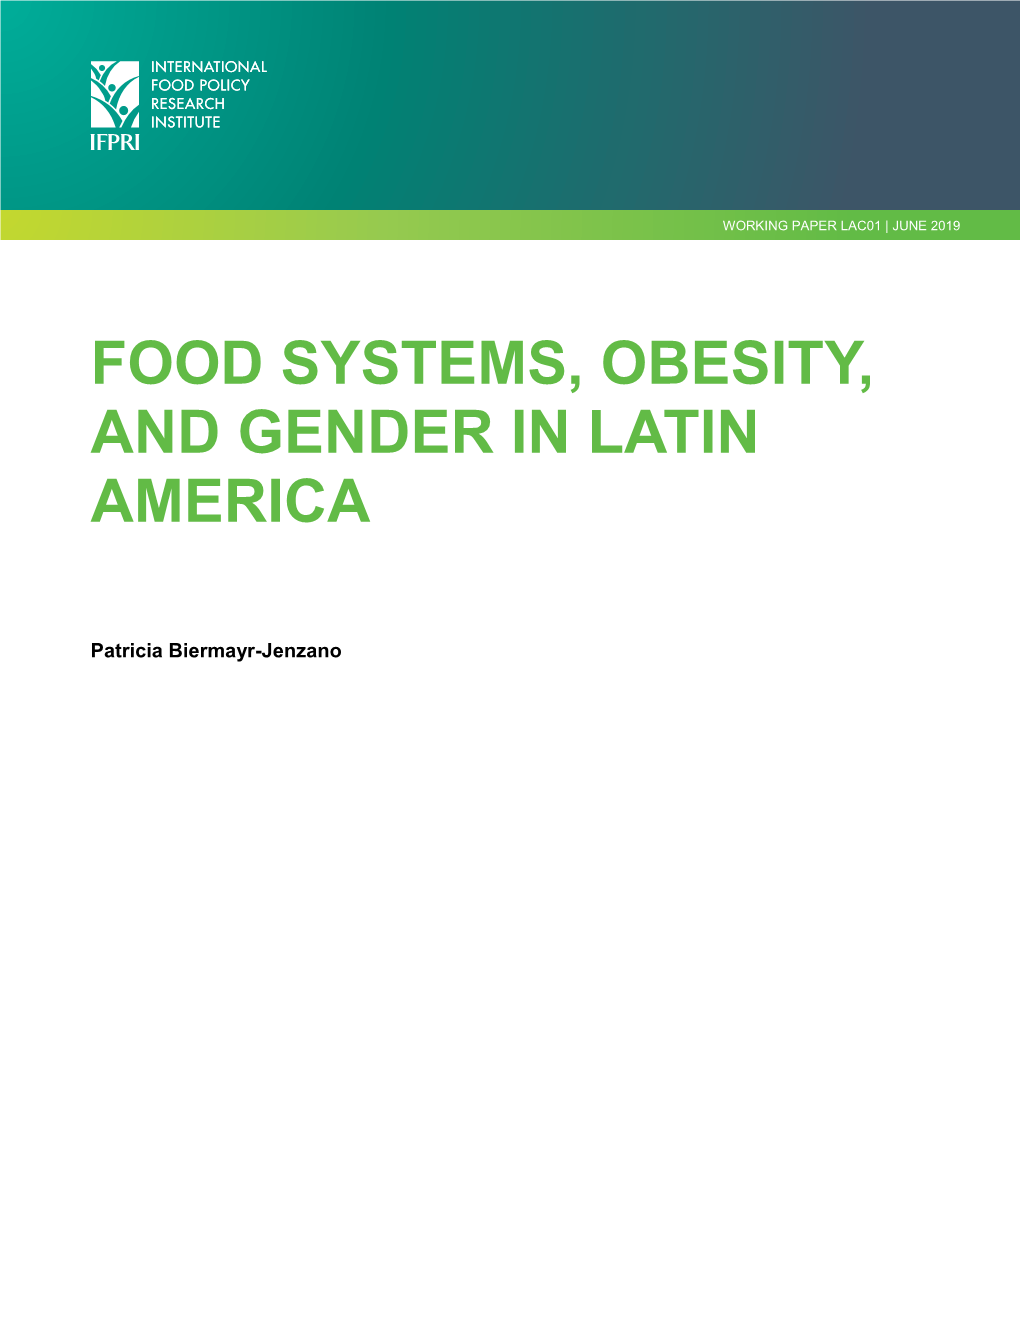 Food Systems, Obesity, and Gender in Latin America